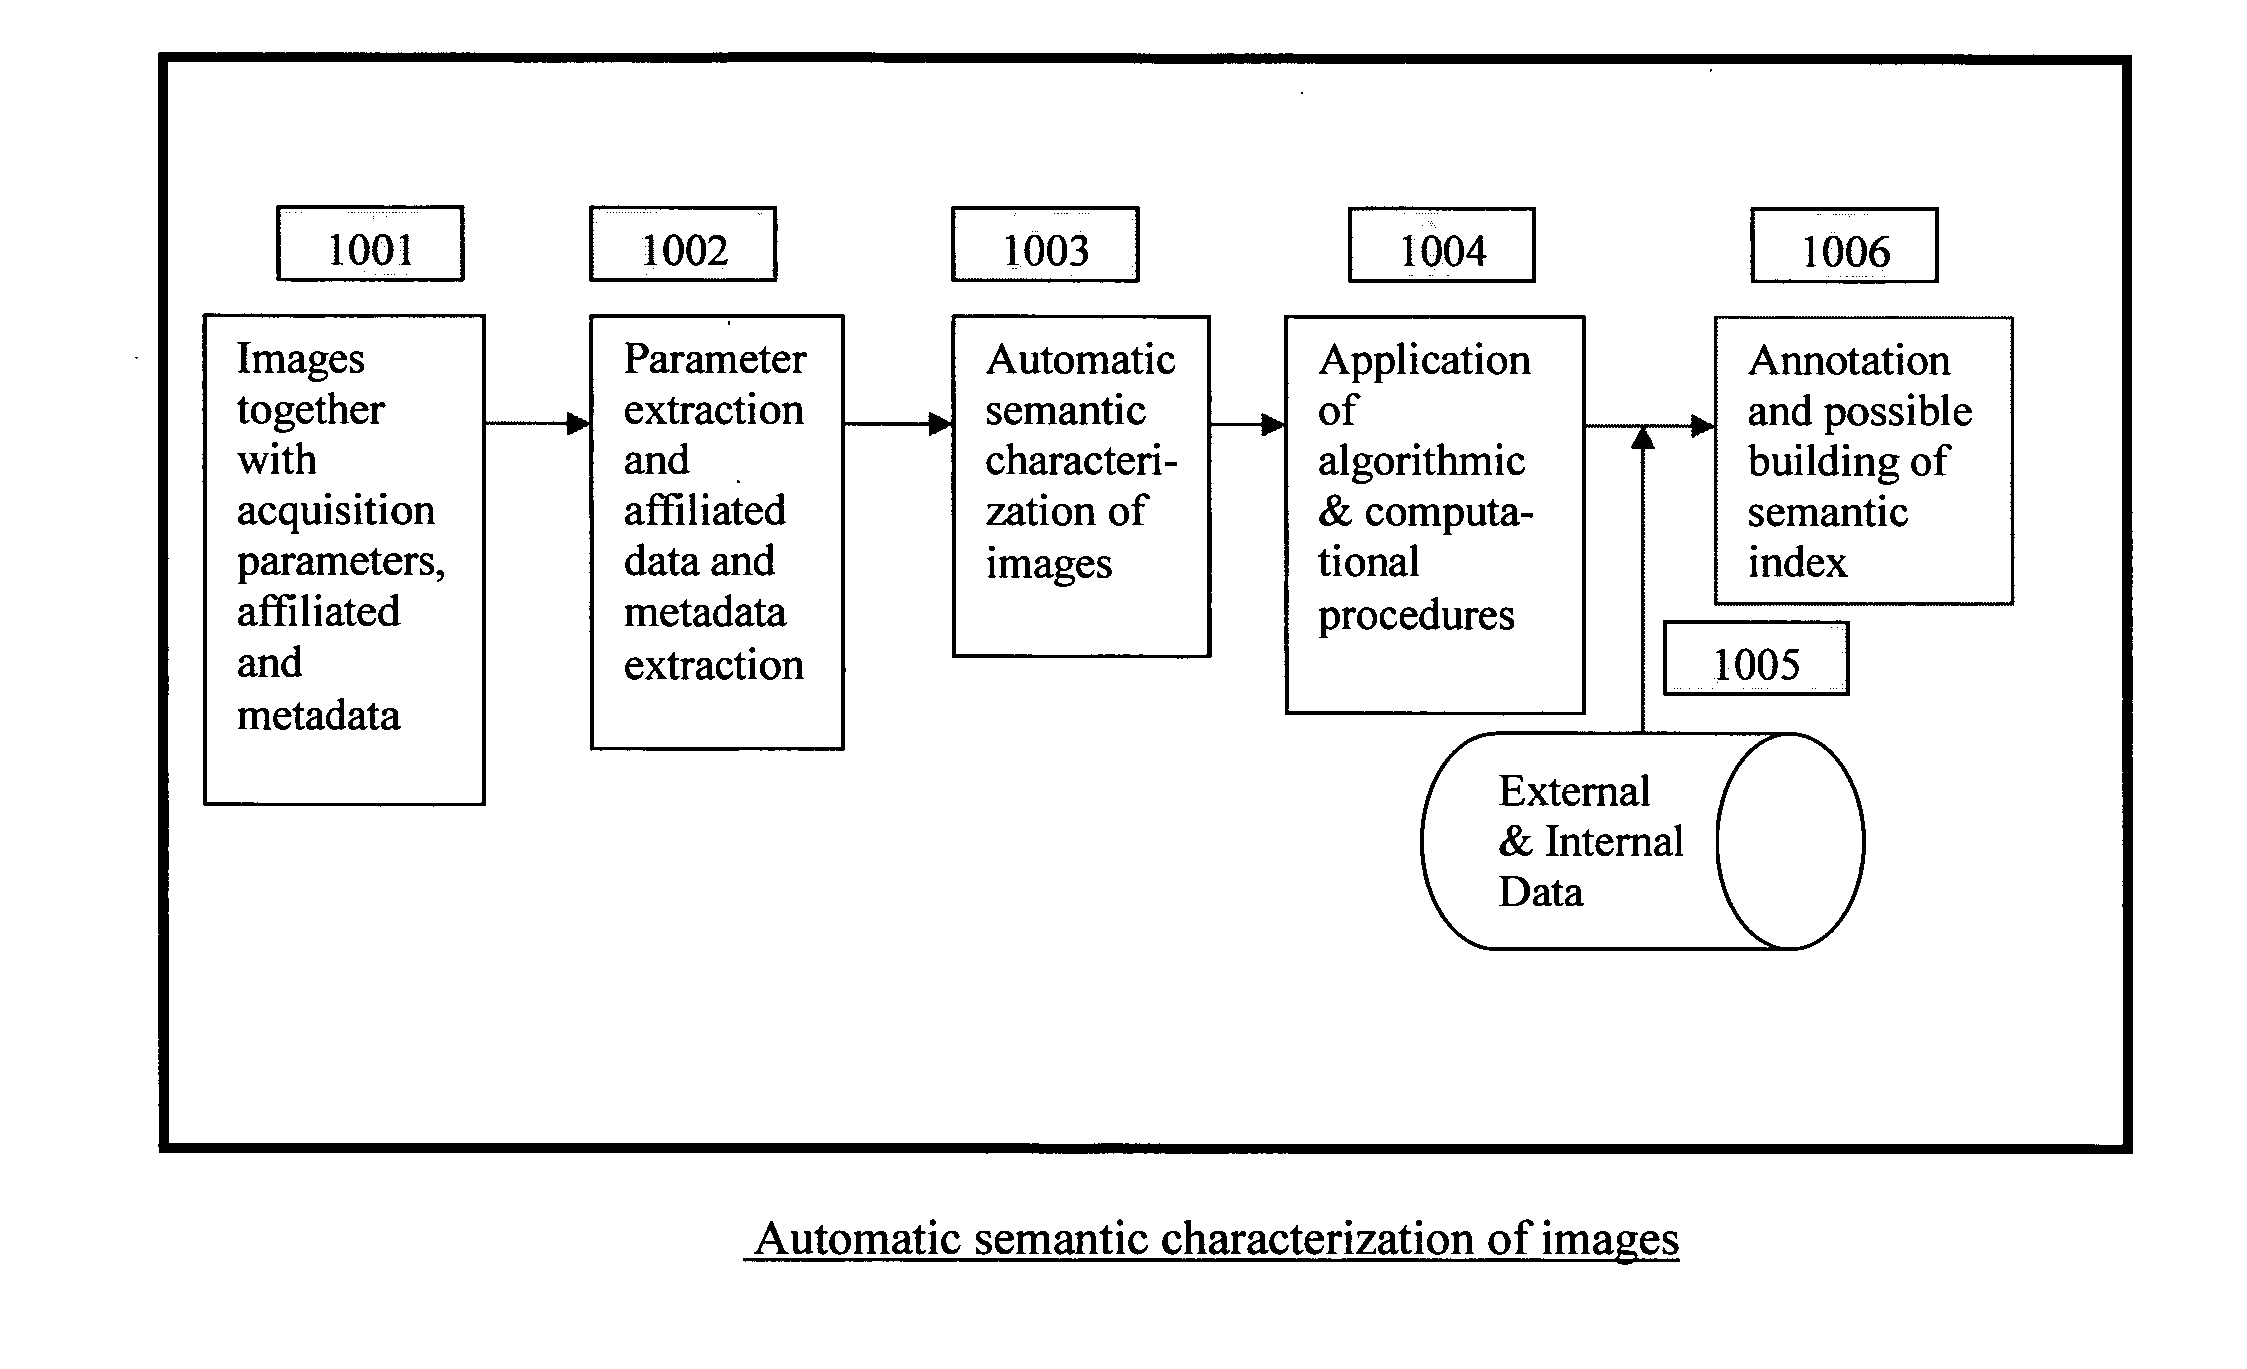 Automatic and Semi-automatic Image Classification, Annotation and Tagging Through the Use of Image Acquisition Parameters and Metadata